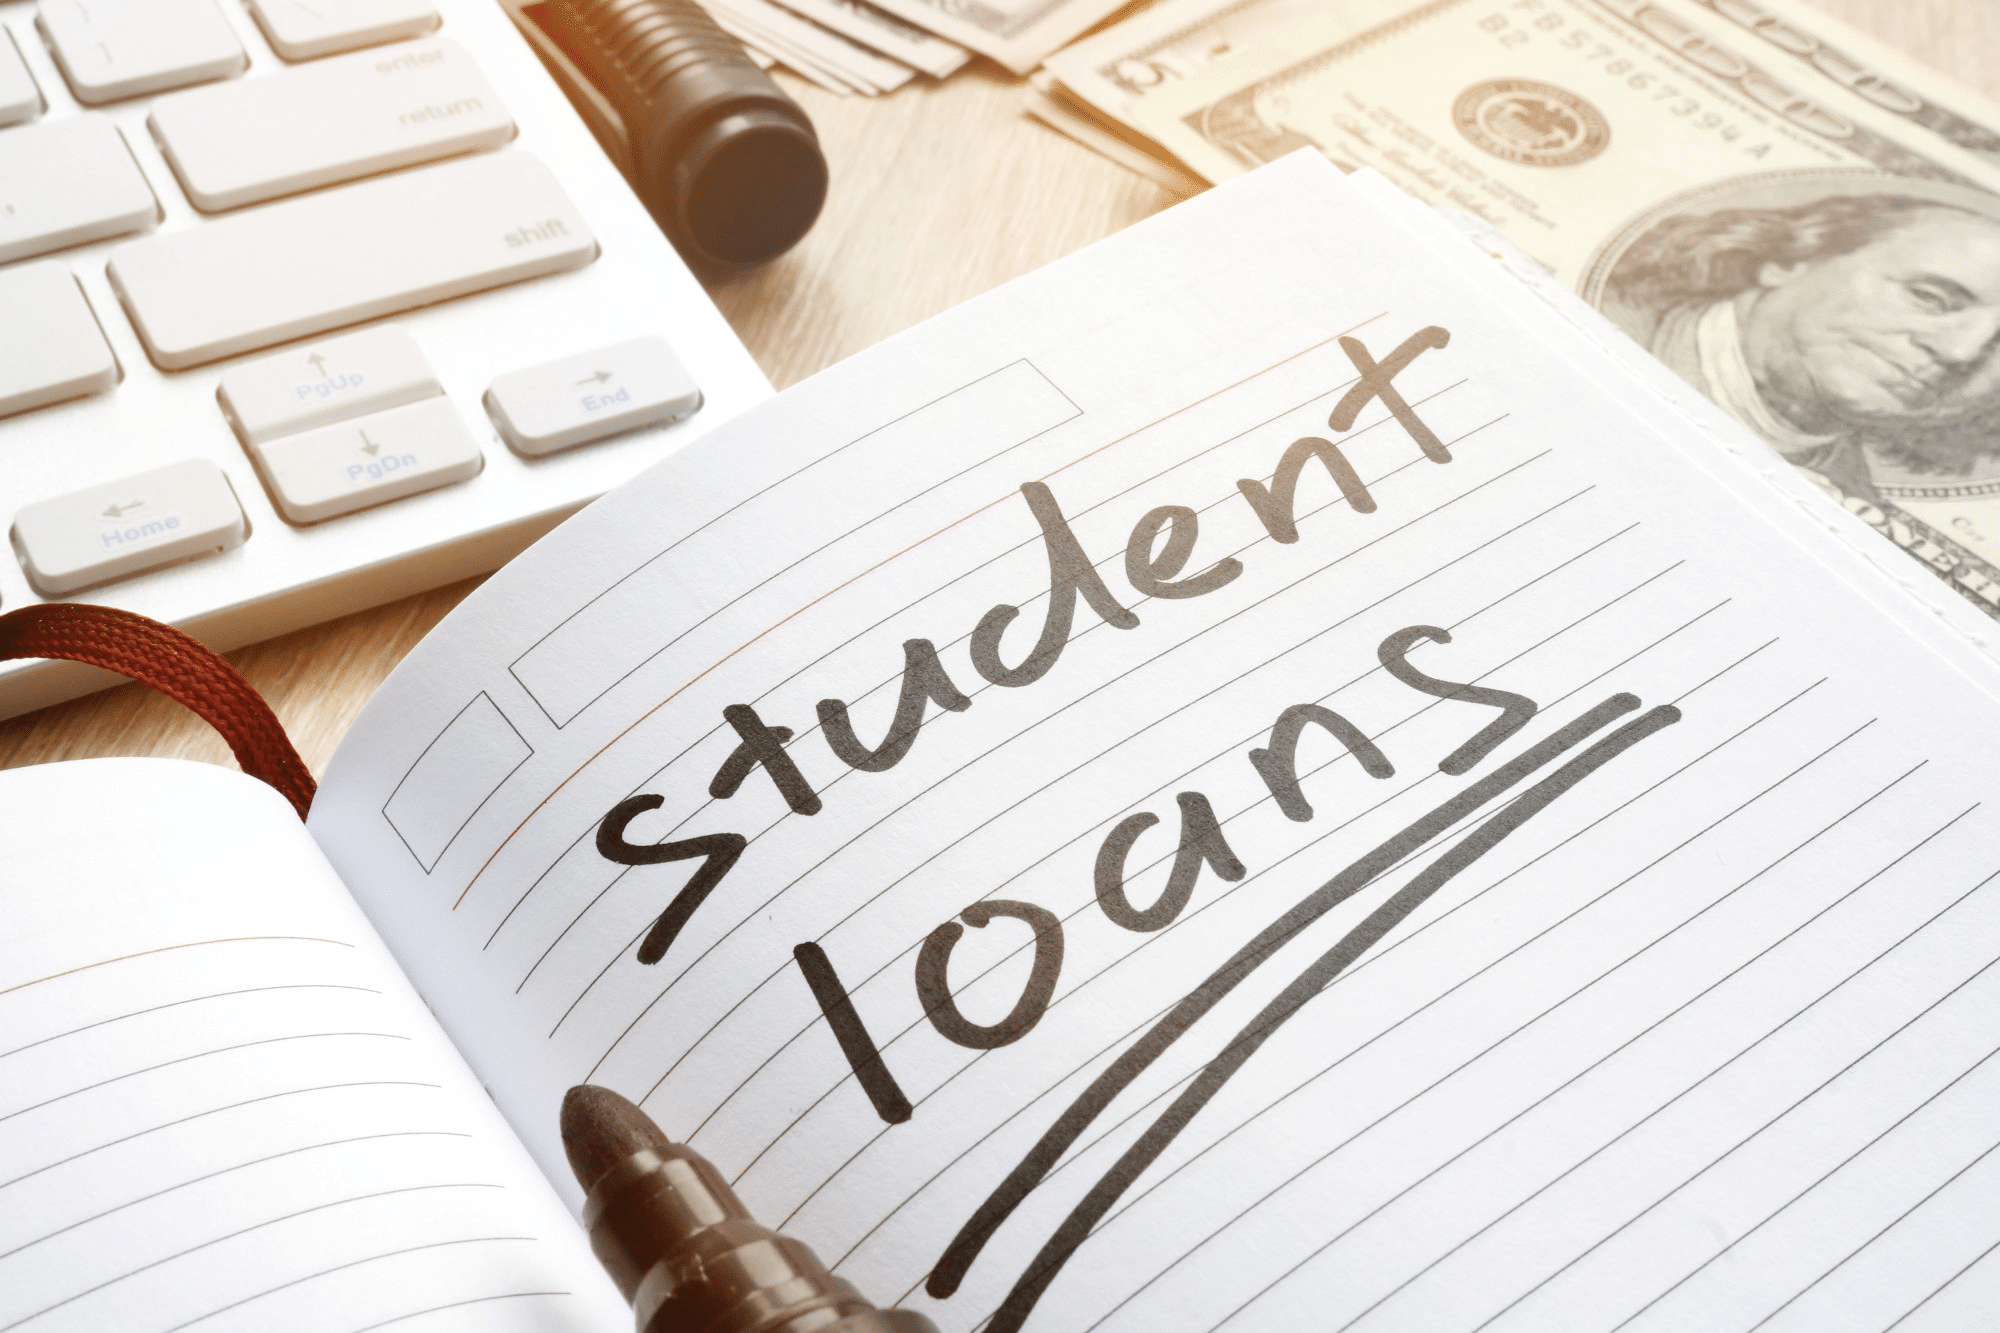 further education loans for mature students in england